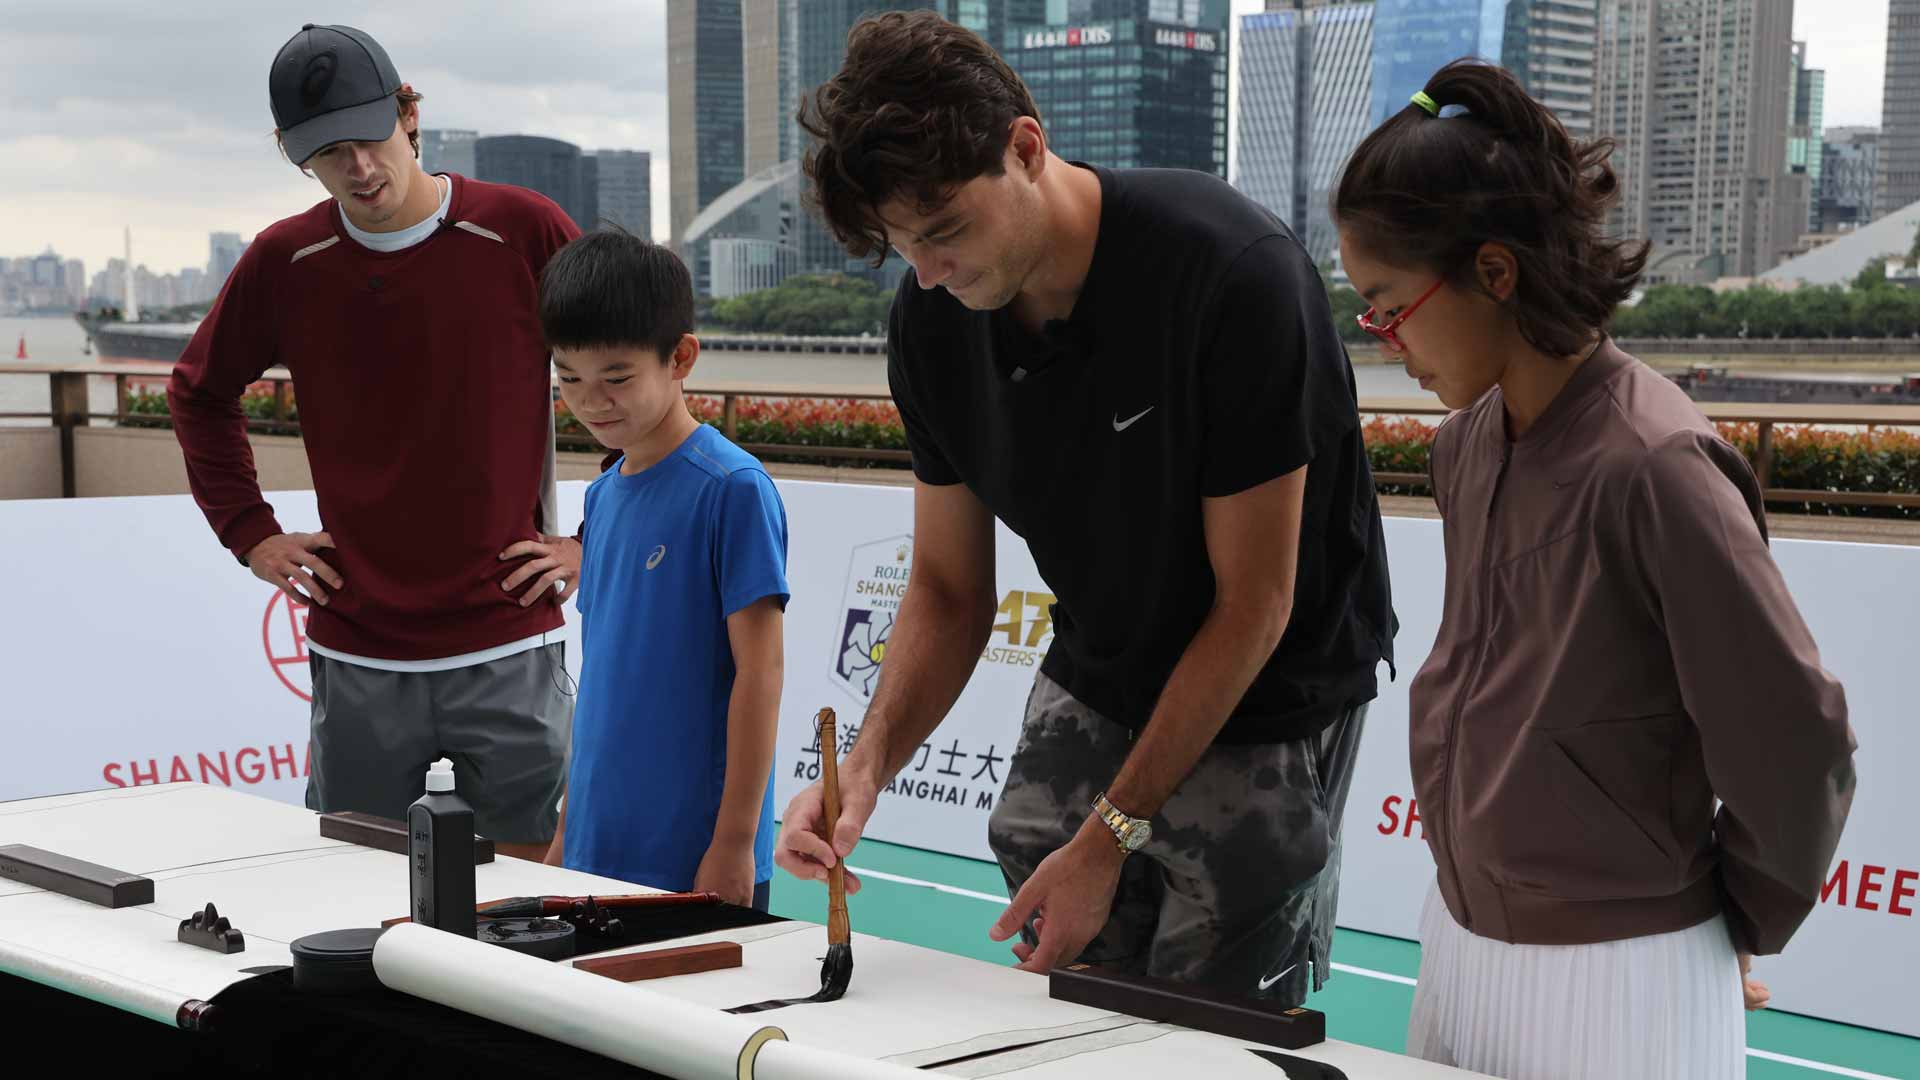 Alex de Minaur (left) and Taylor Fritz learn about Chinese calligraphy in Shanghai.